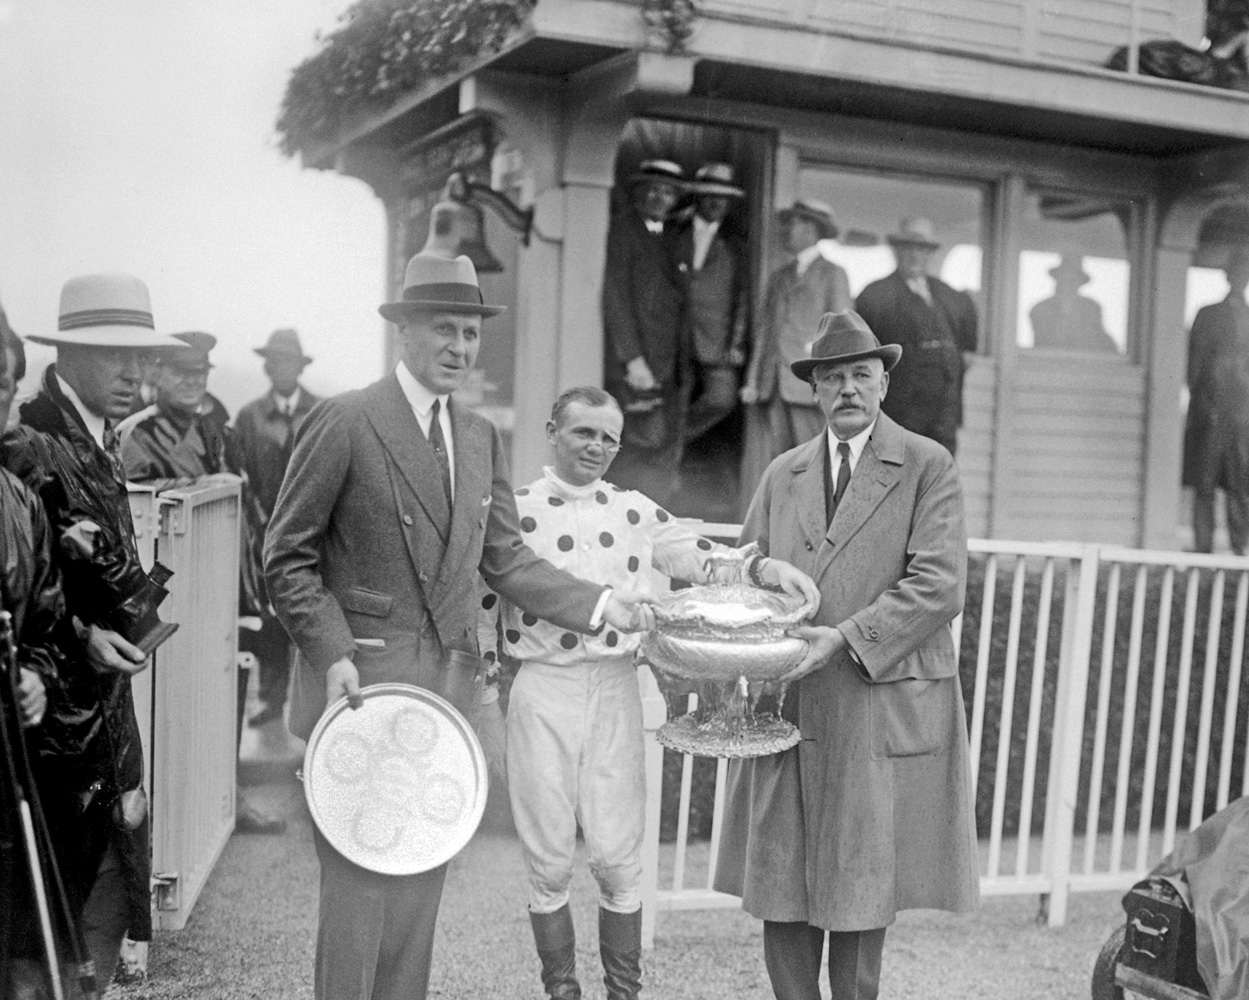 Jockey Earl Sande and owner William Woodward, Sr. receive the Belmont Stakes trophies from Joseph E. Widener after Gallant Fox's victory in 1930 (Keeneland Library Cook Collection)